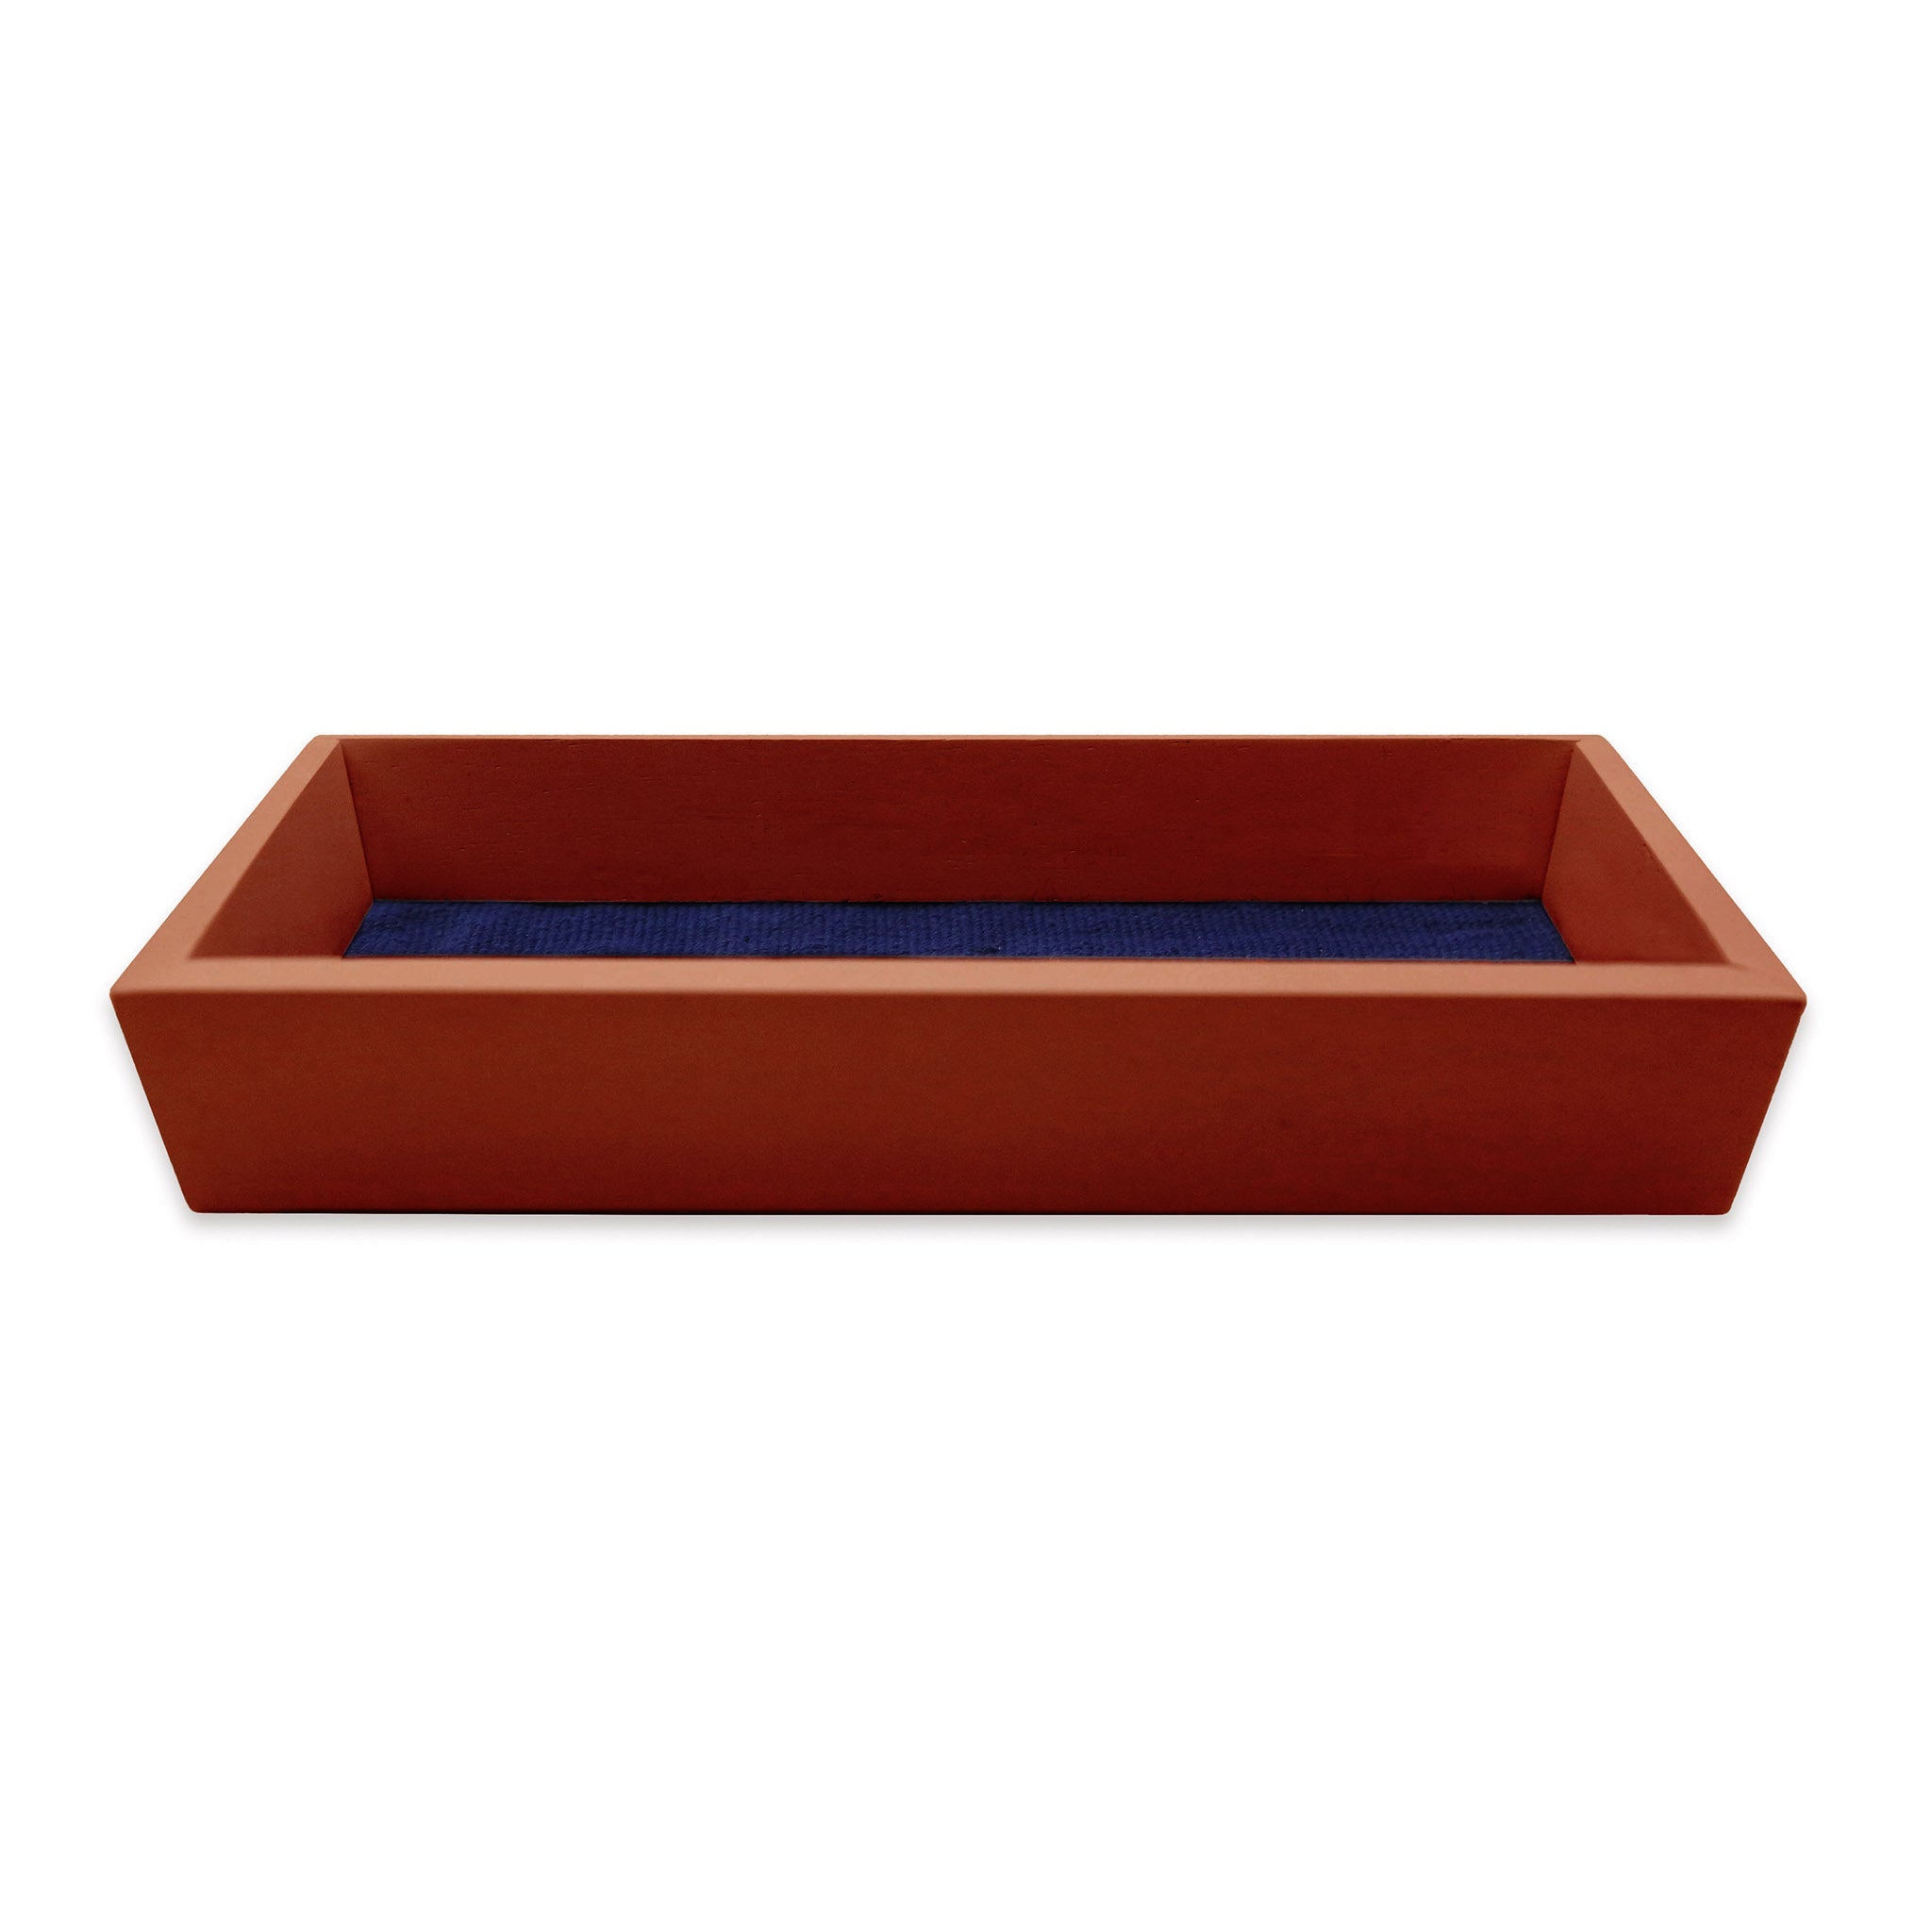 Texas Tech Valet Tray (Red) (Chestnut Wood)